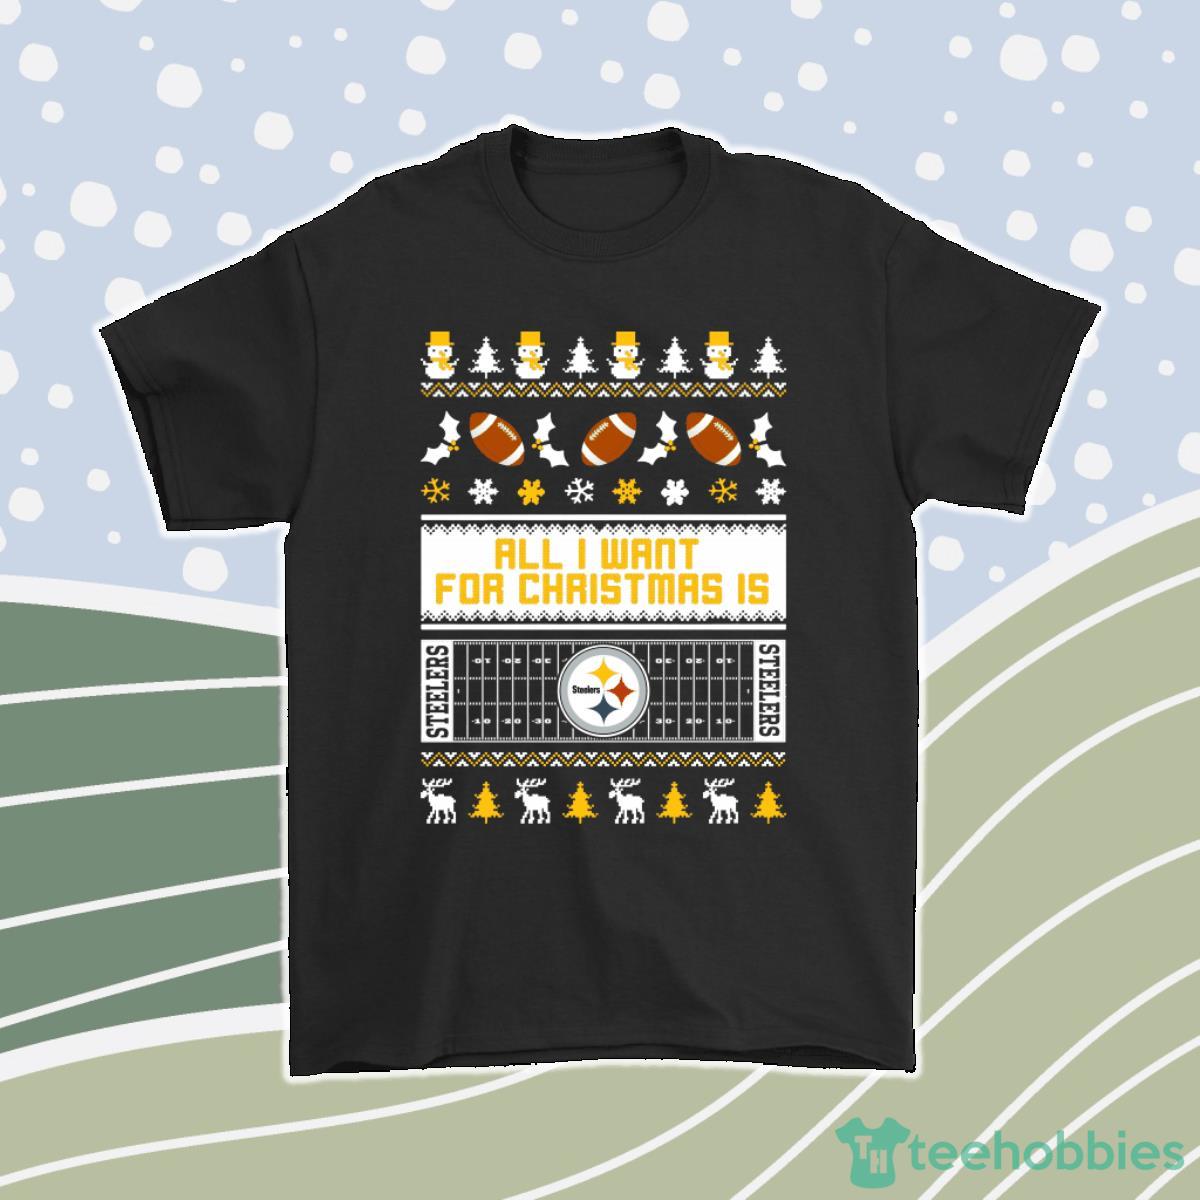 All I Want For Christmas Is Pittsburgh Steelers Nfl Men Women T-Shirt, Hoodie, Sweatshirt Product Photo 1